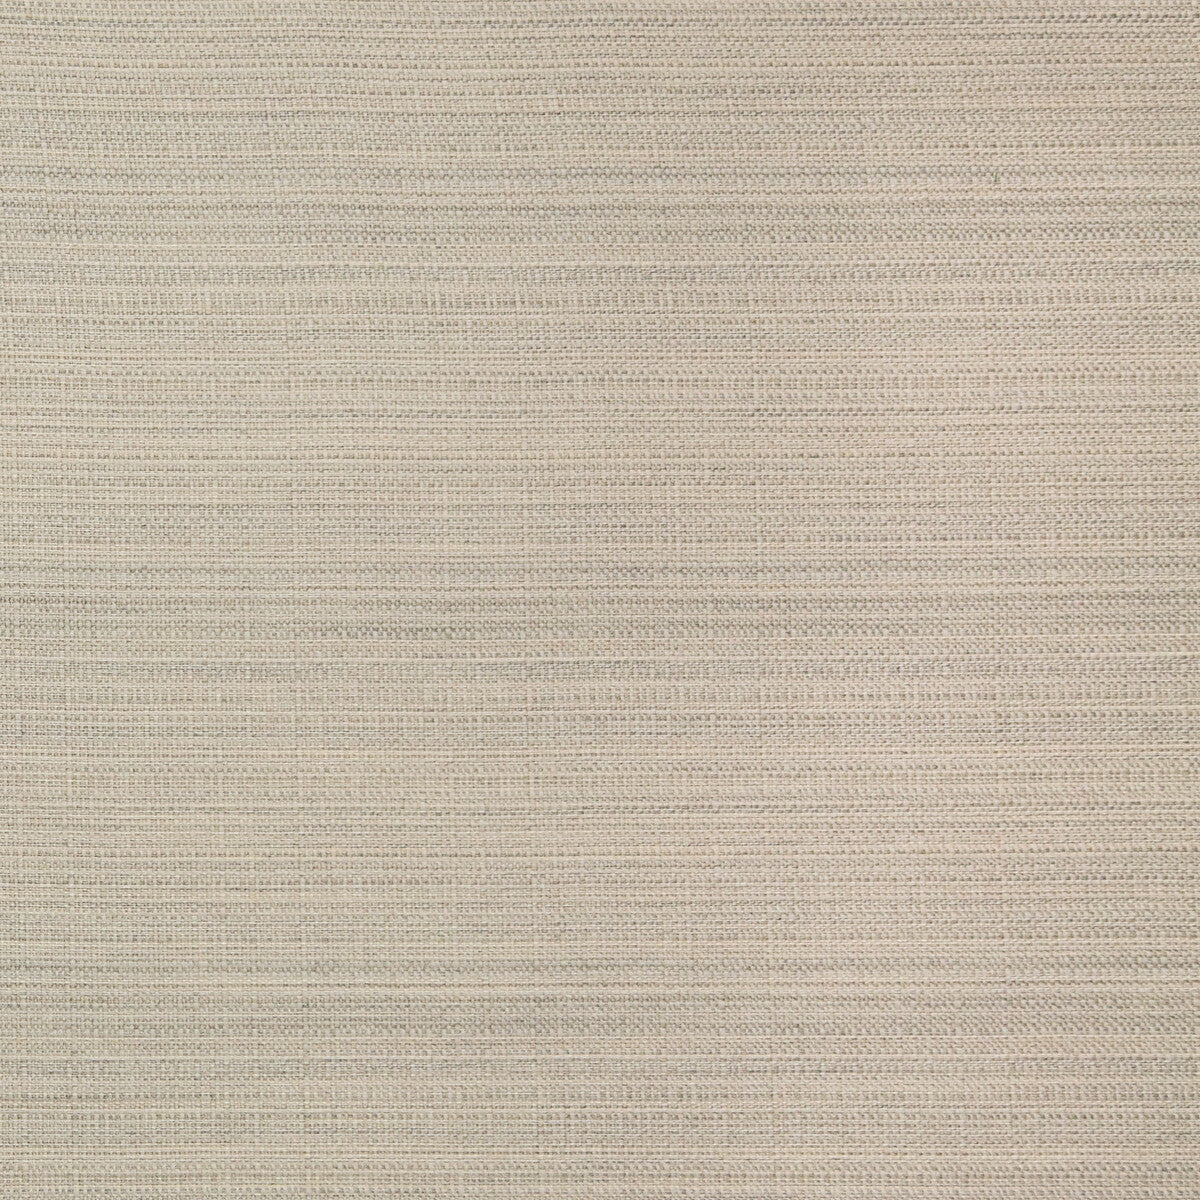 Arroyo fabric in sand color - pattern 35823.1611.0 - by Kravet Design in the Indoor / Outdoor collection